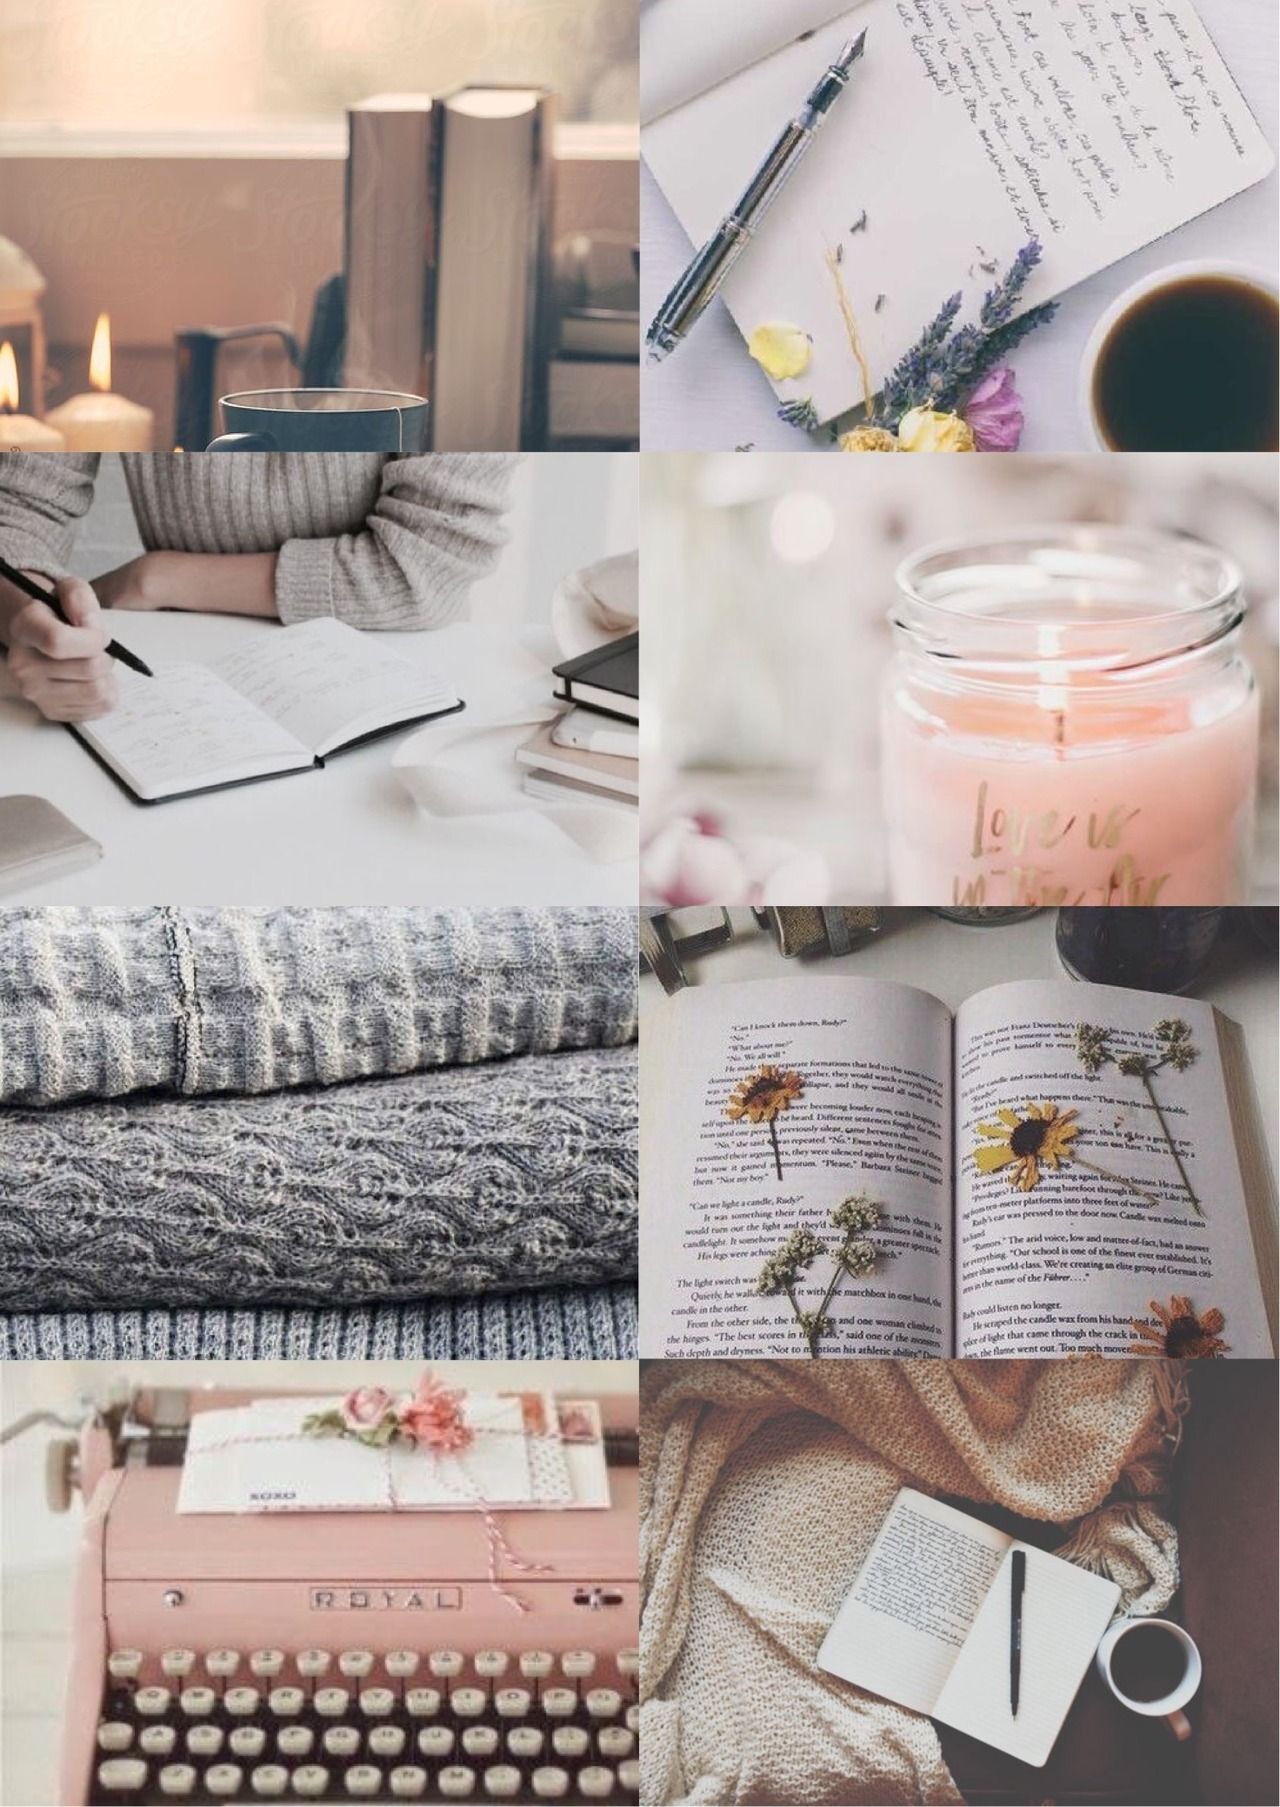 writer aesthetic for ♡. Aesthetic writing, Aesthetic collage, Book aesthetic